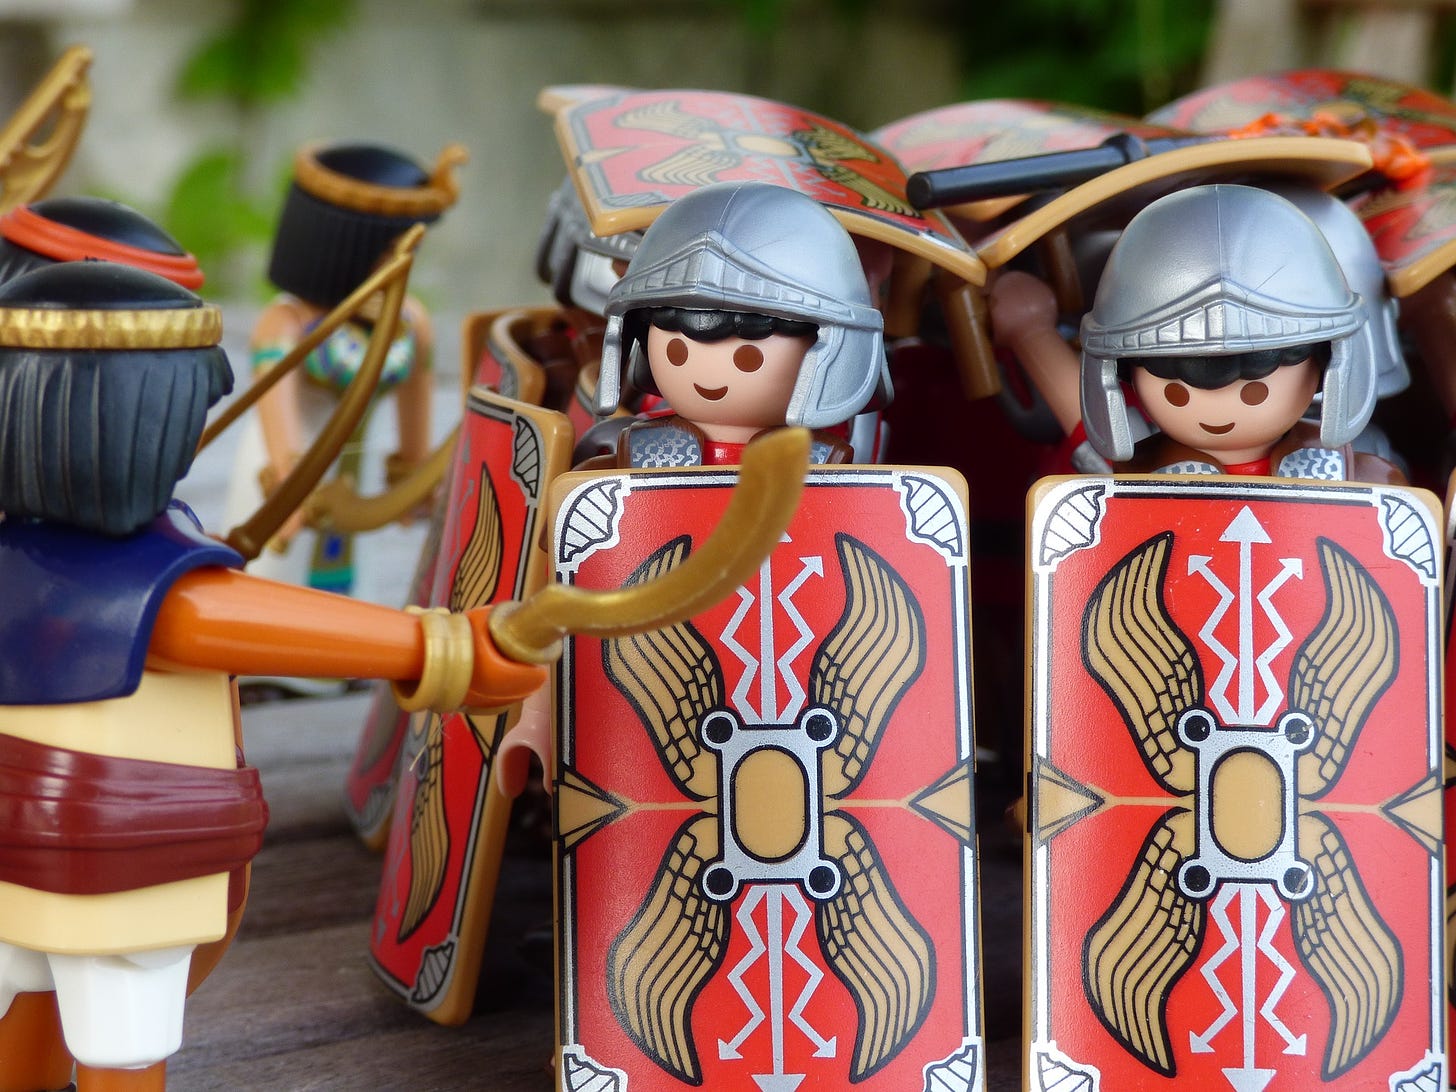 Close up of several Playmobil figures dressed in Roman costume.